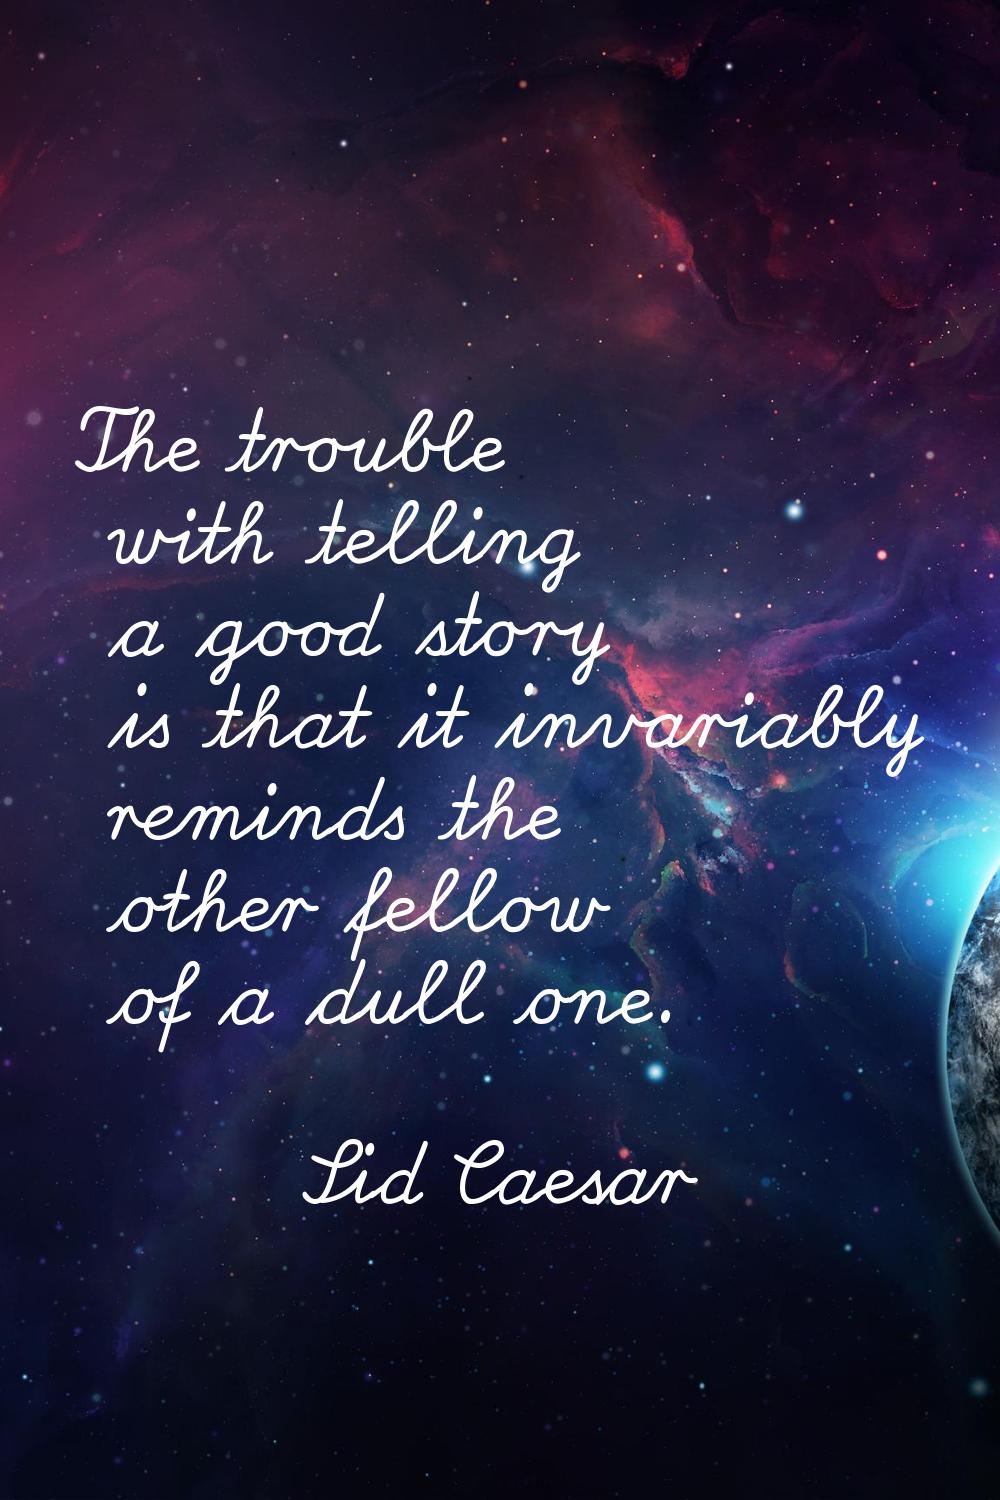 The trouble with telling a good story is that it invariably reminds the other fellow of a dull one.